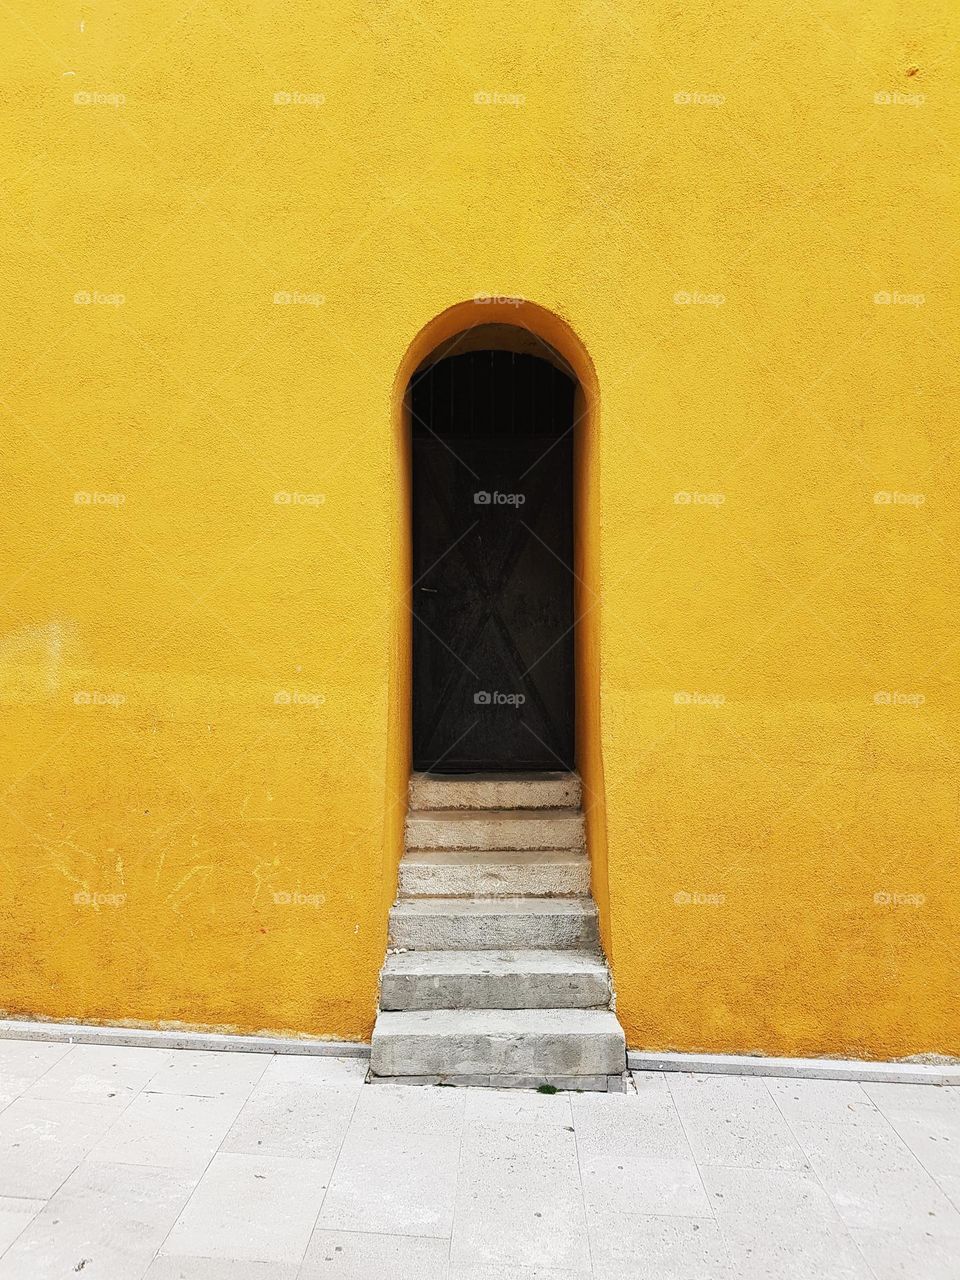 Stone steps leading to dark arched entrance on old building with yellow facade